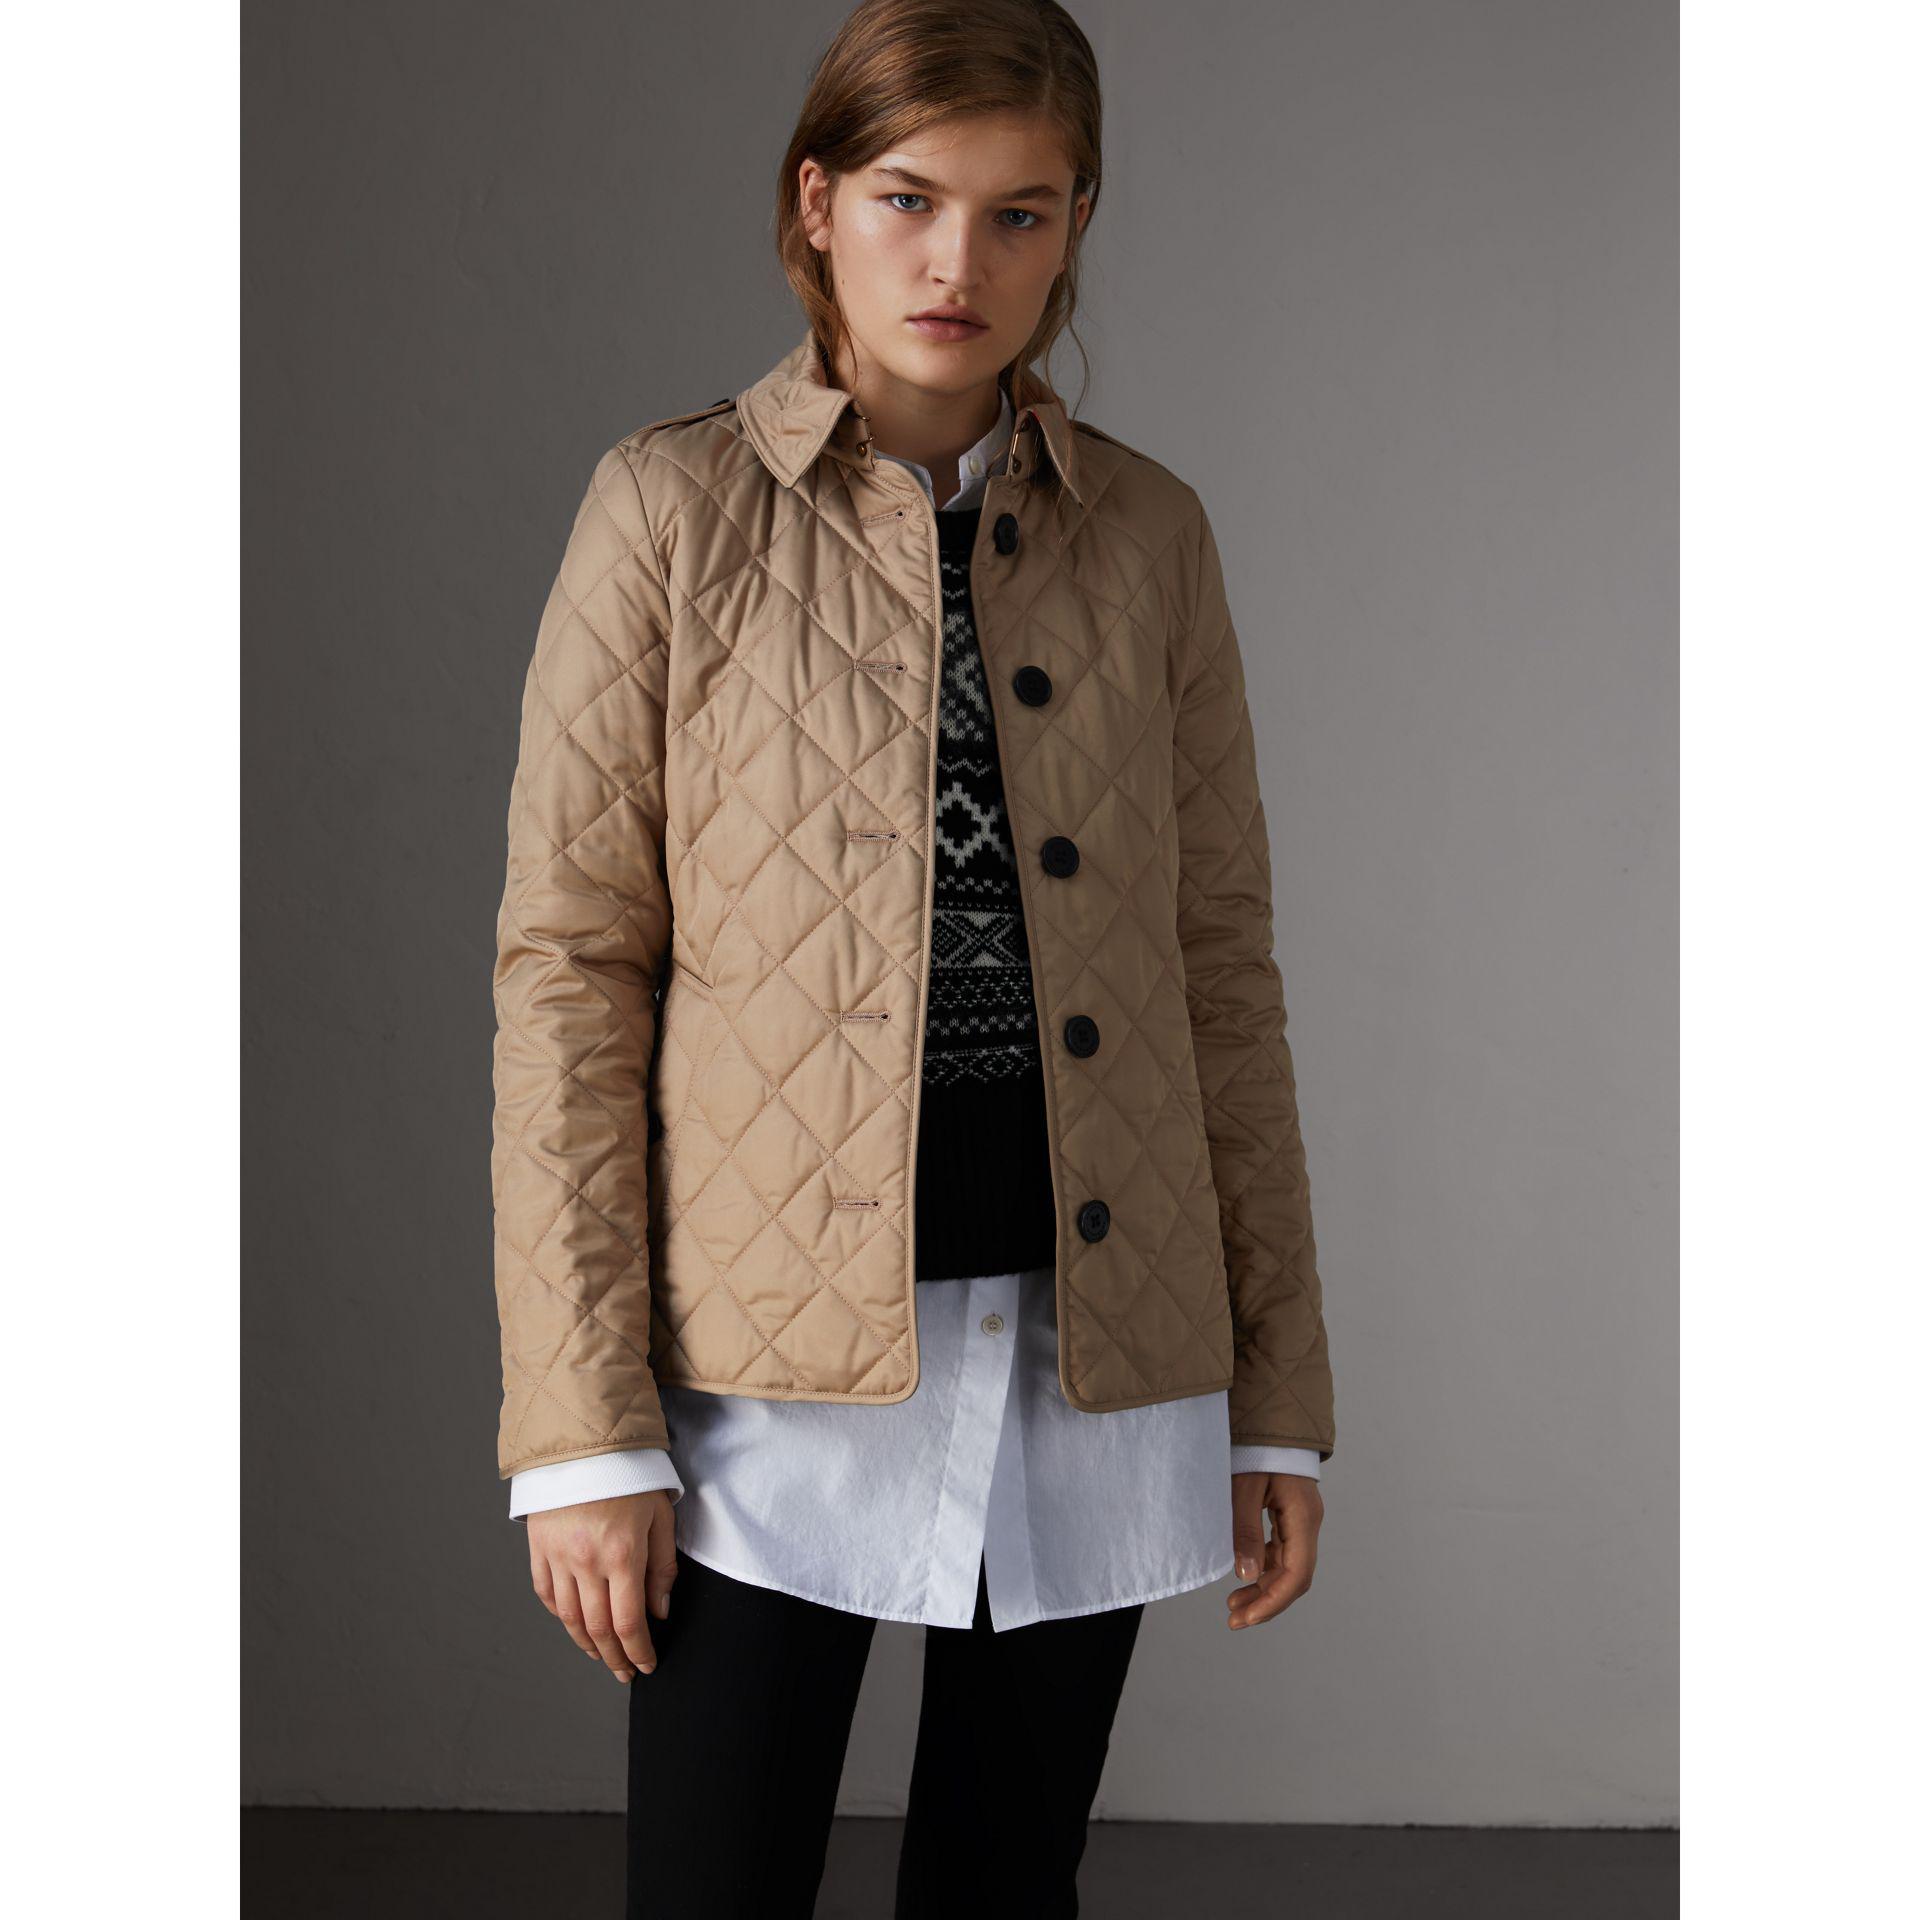 burberry diamond quilted jacket